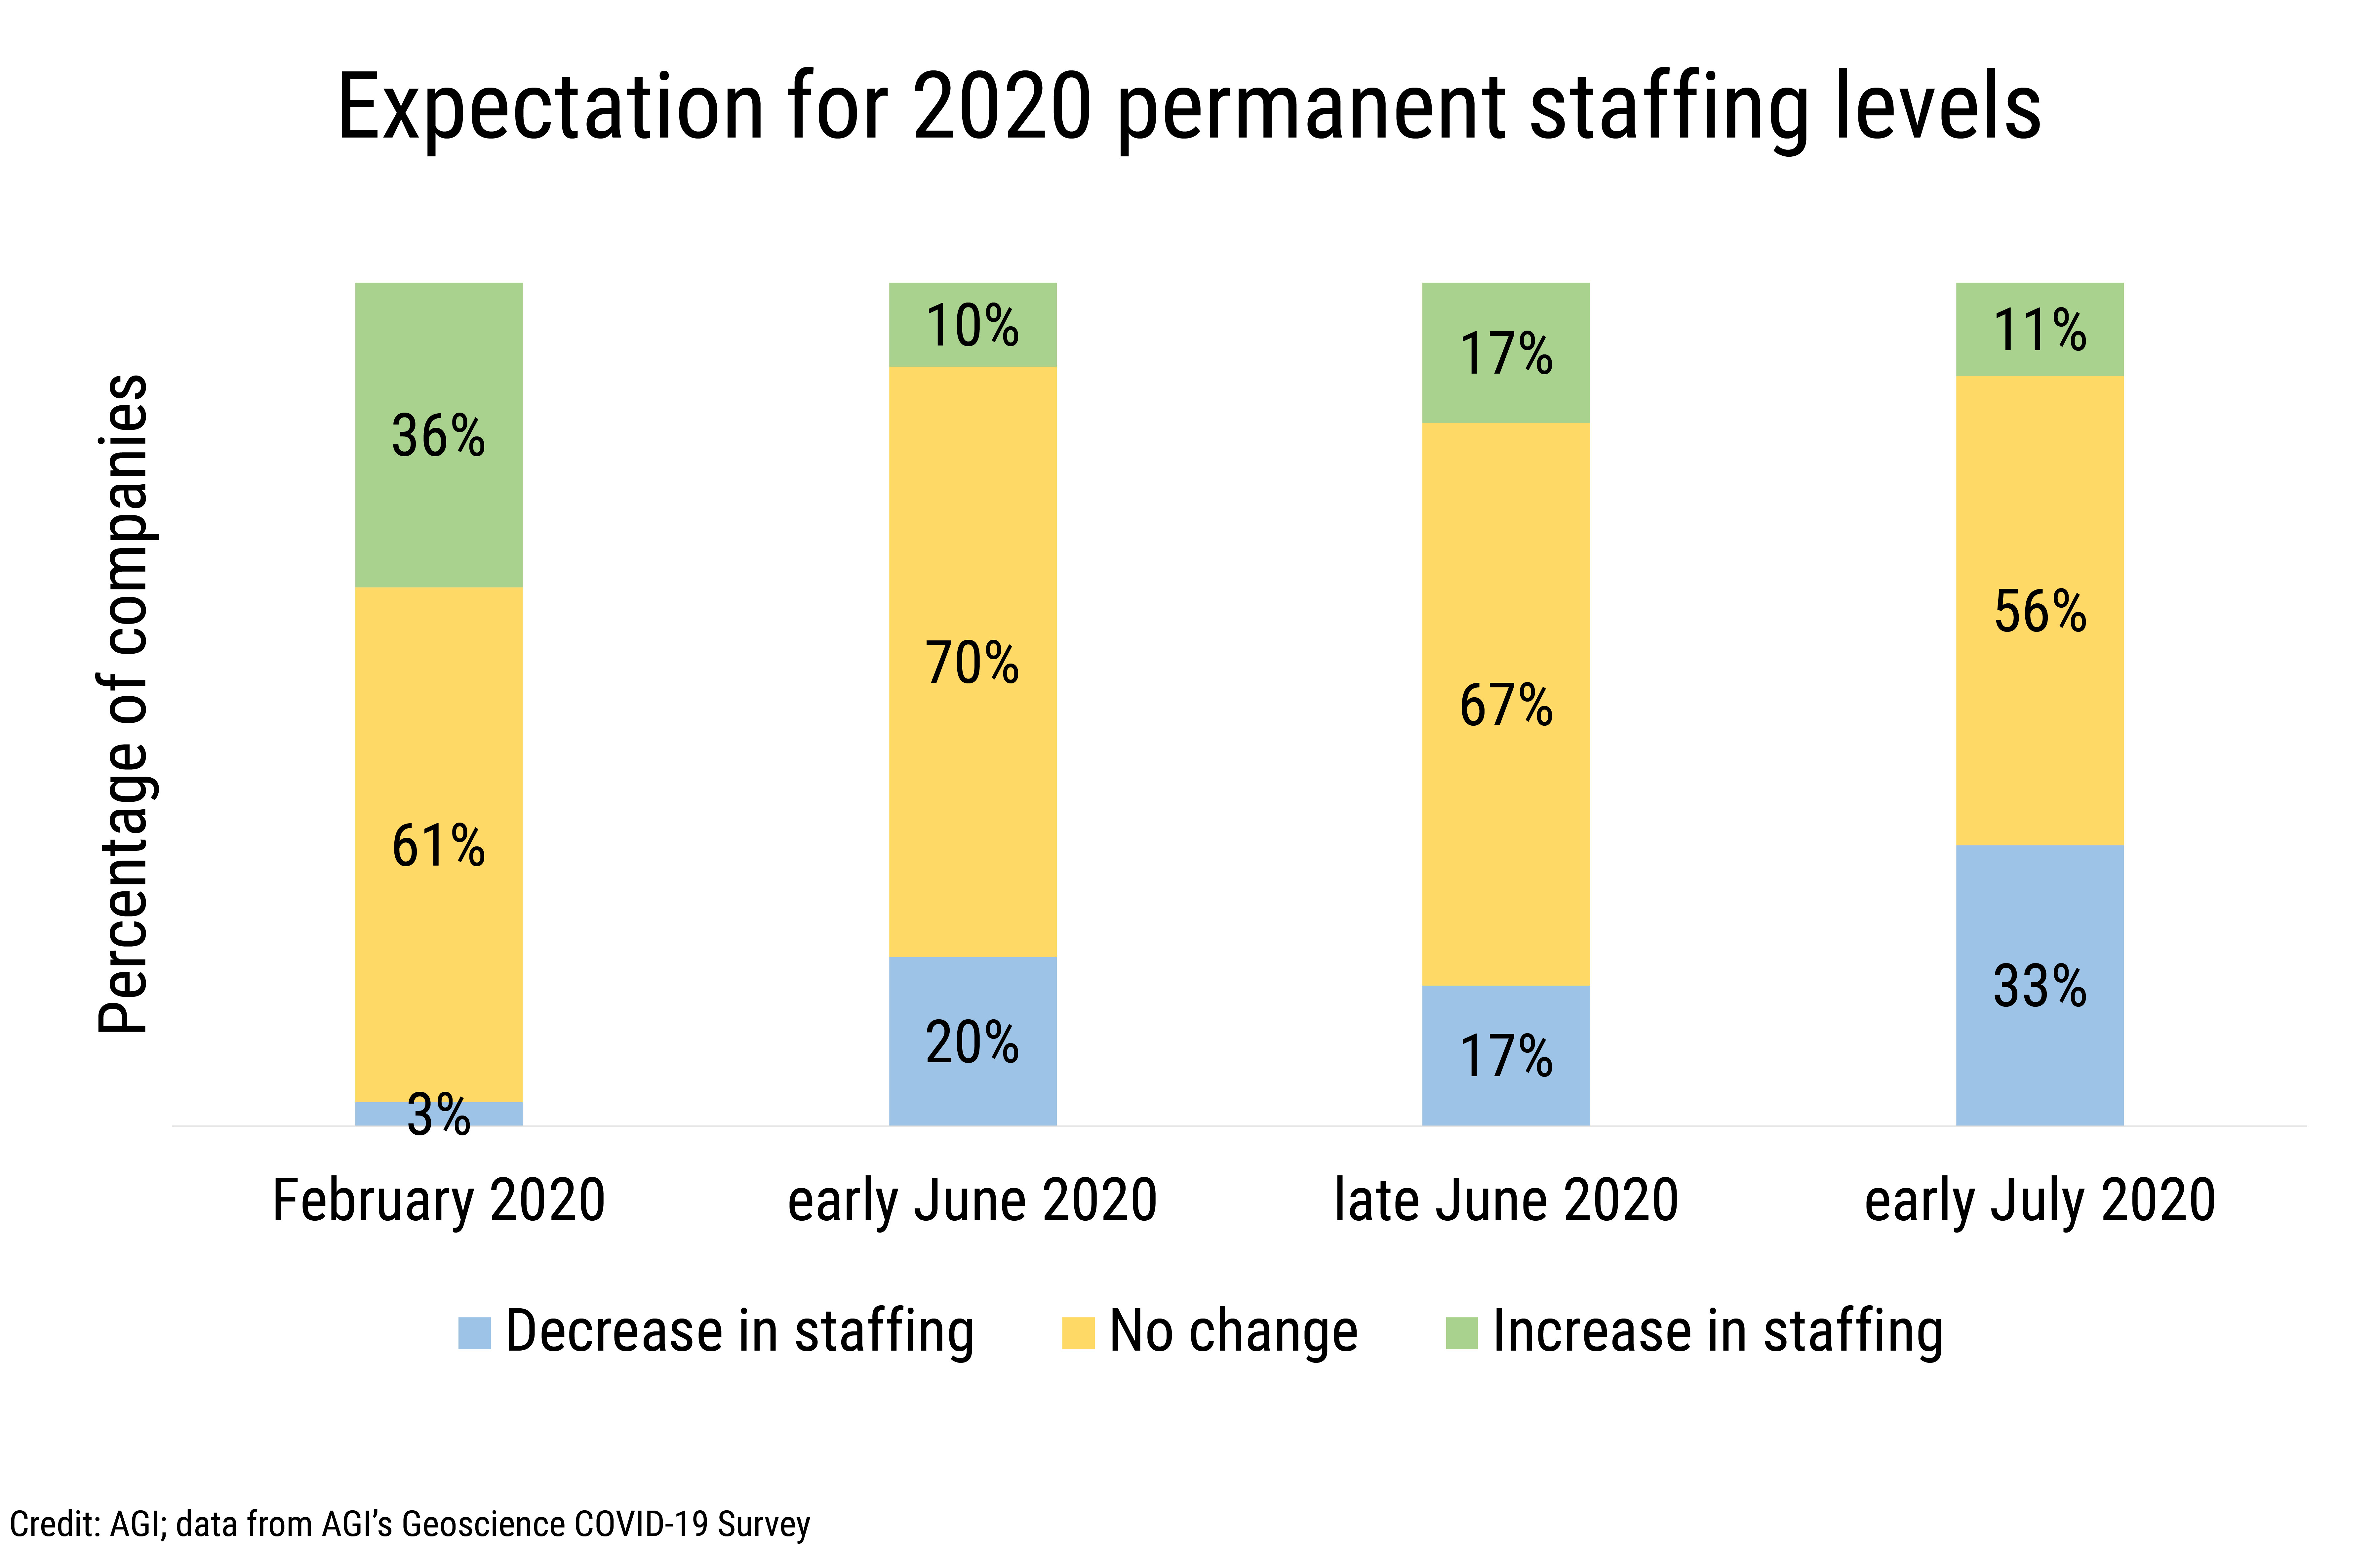 Data Brief 2020-012 chart-01: Expectation for 2020 permanent staffing levels. (Credit: AGI; data from AGI's Geoscience COVID-19 Survey)